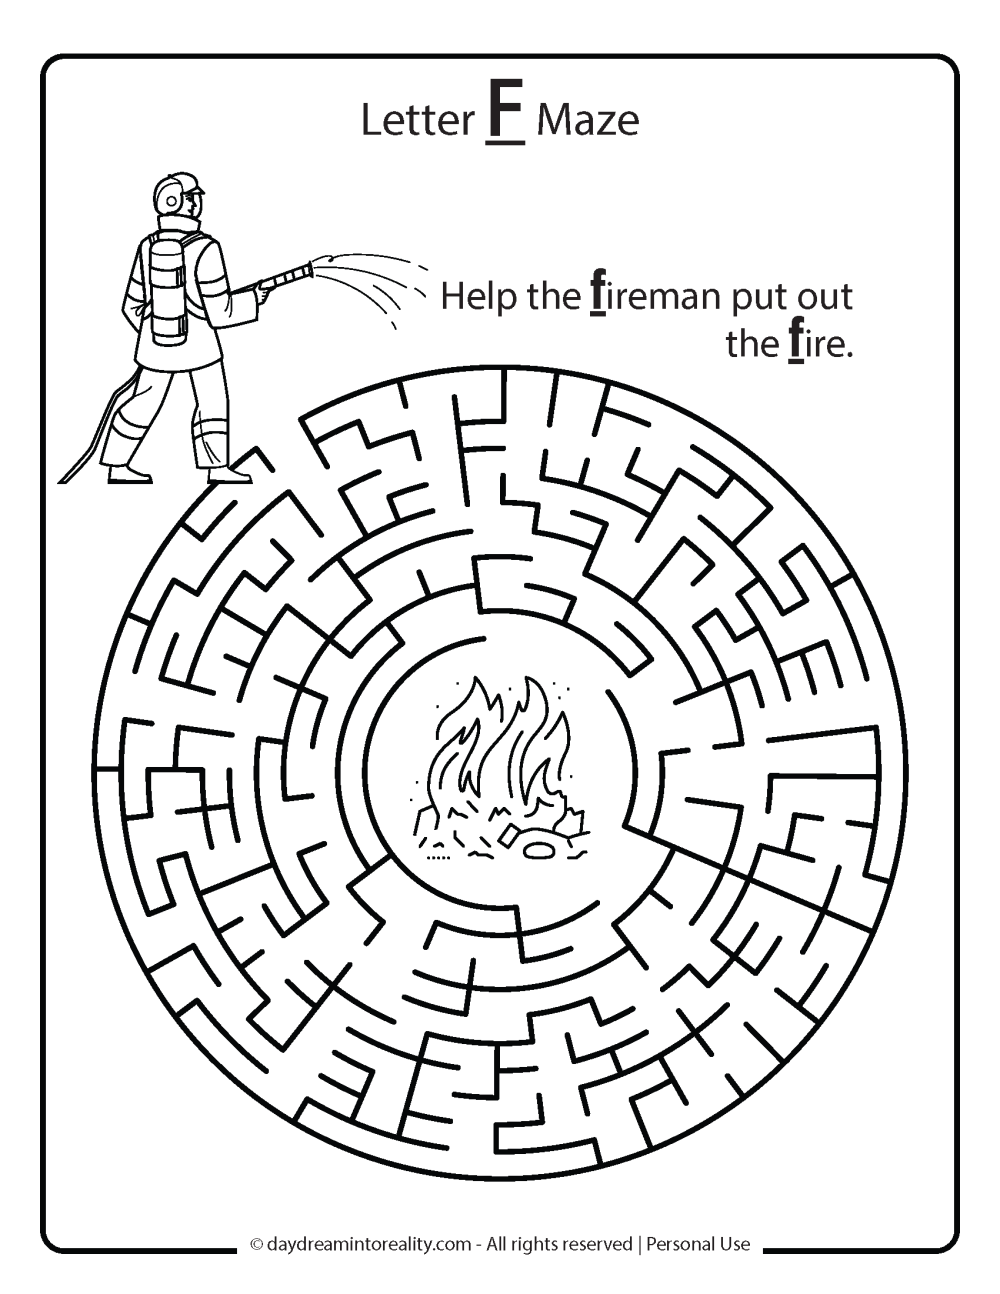 Help the fireman put out the fire Maze Free Printable